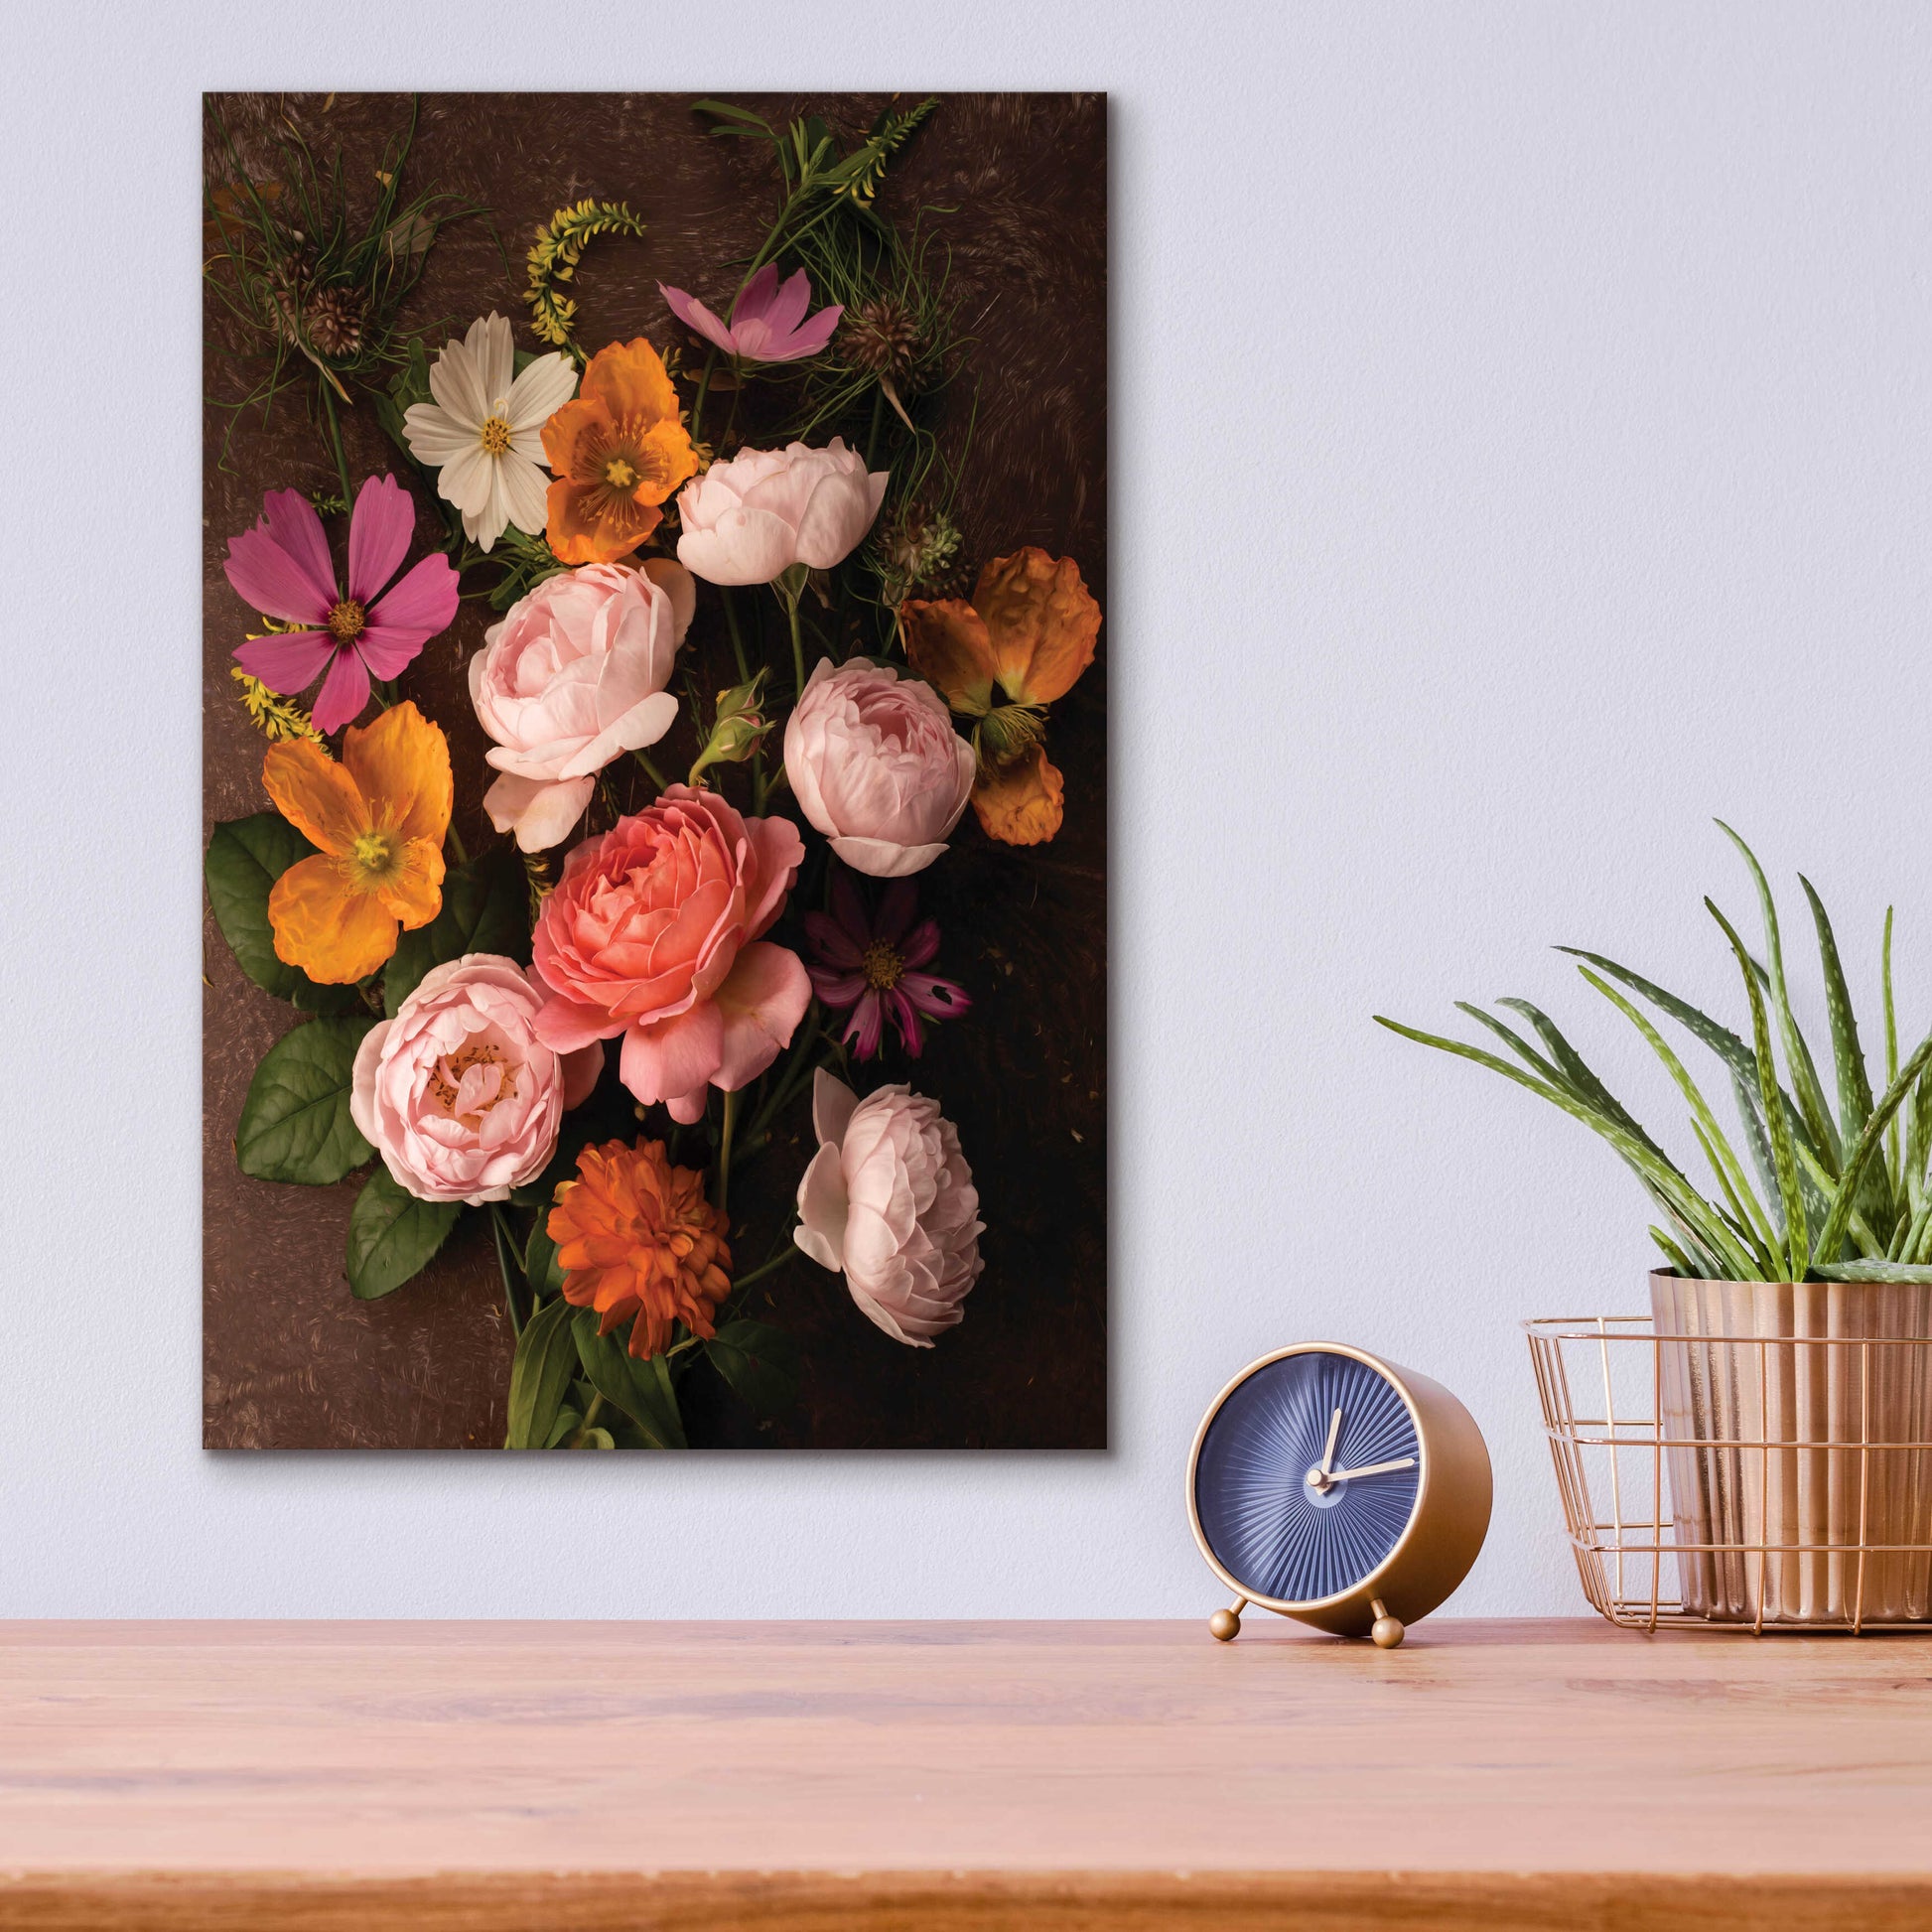 Epic Art 'A Pocket Full of Posies' by Leah McLean, Acrylic Glass Wall Art,12x16